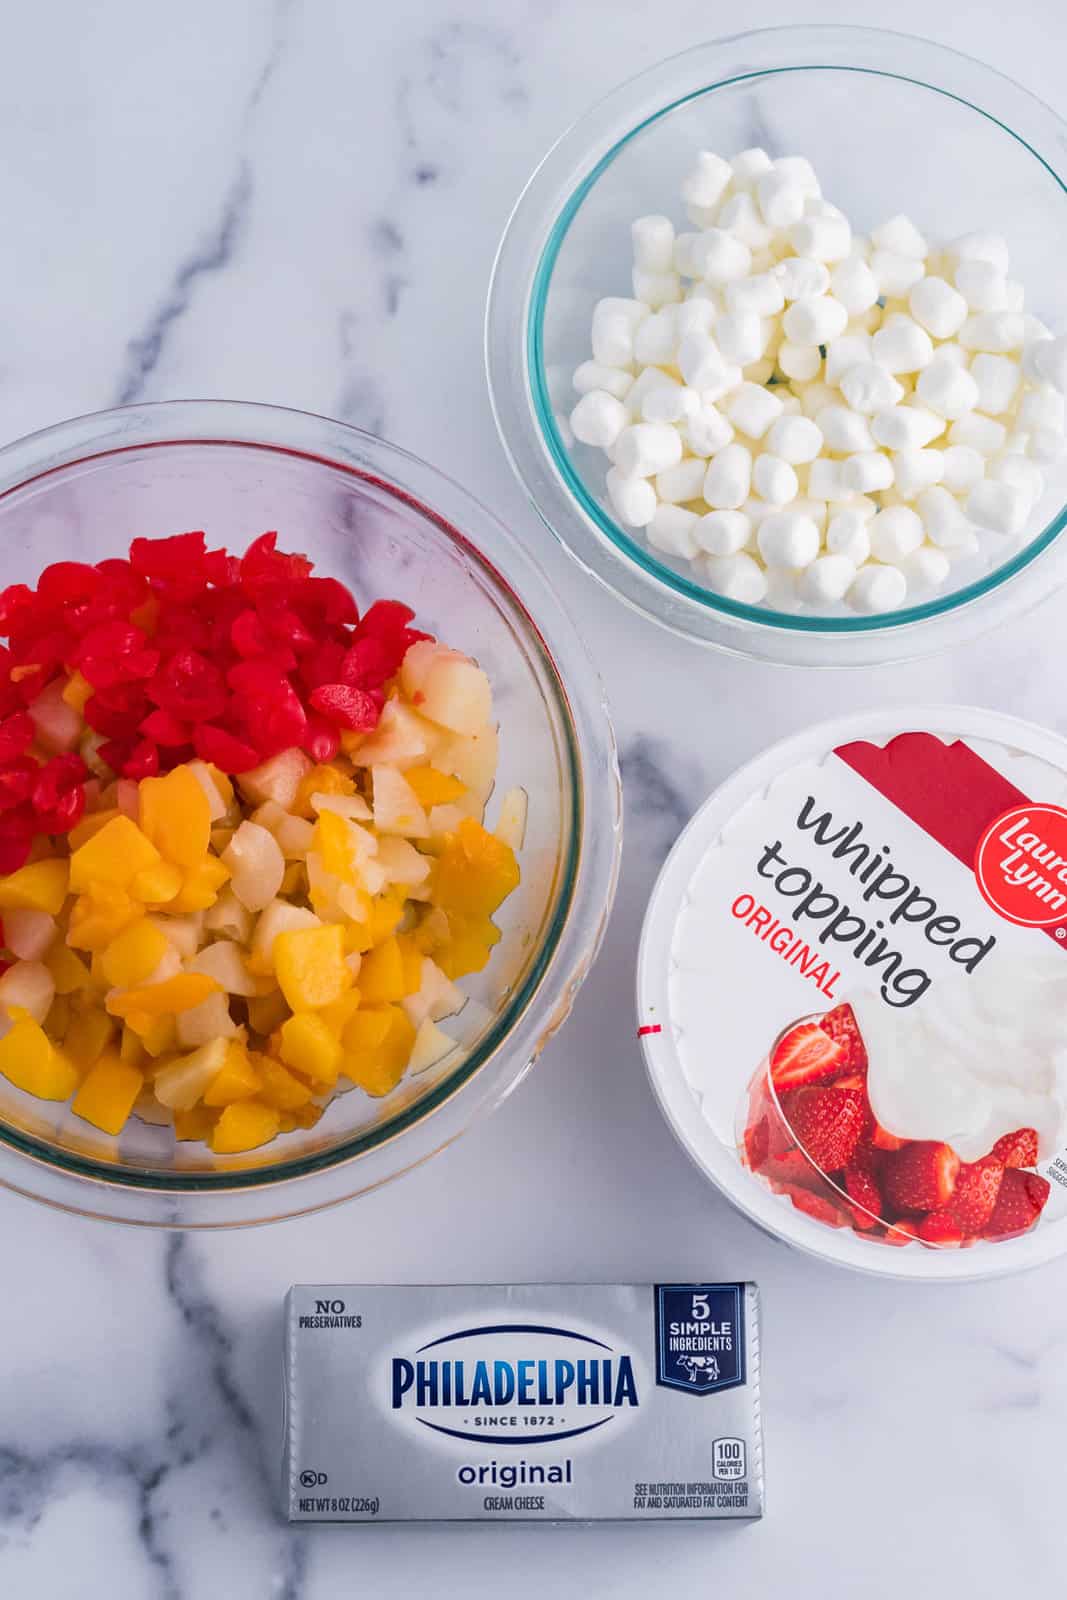 Cream cheese, whipped topping, marshmallows, canned fruit cocktail and cherries.